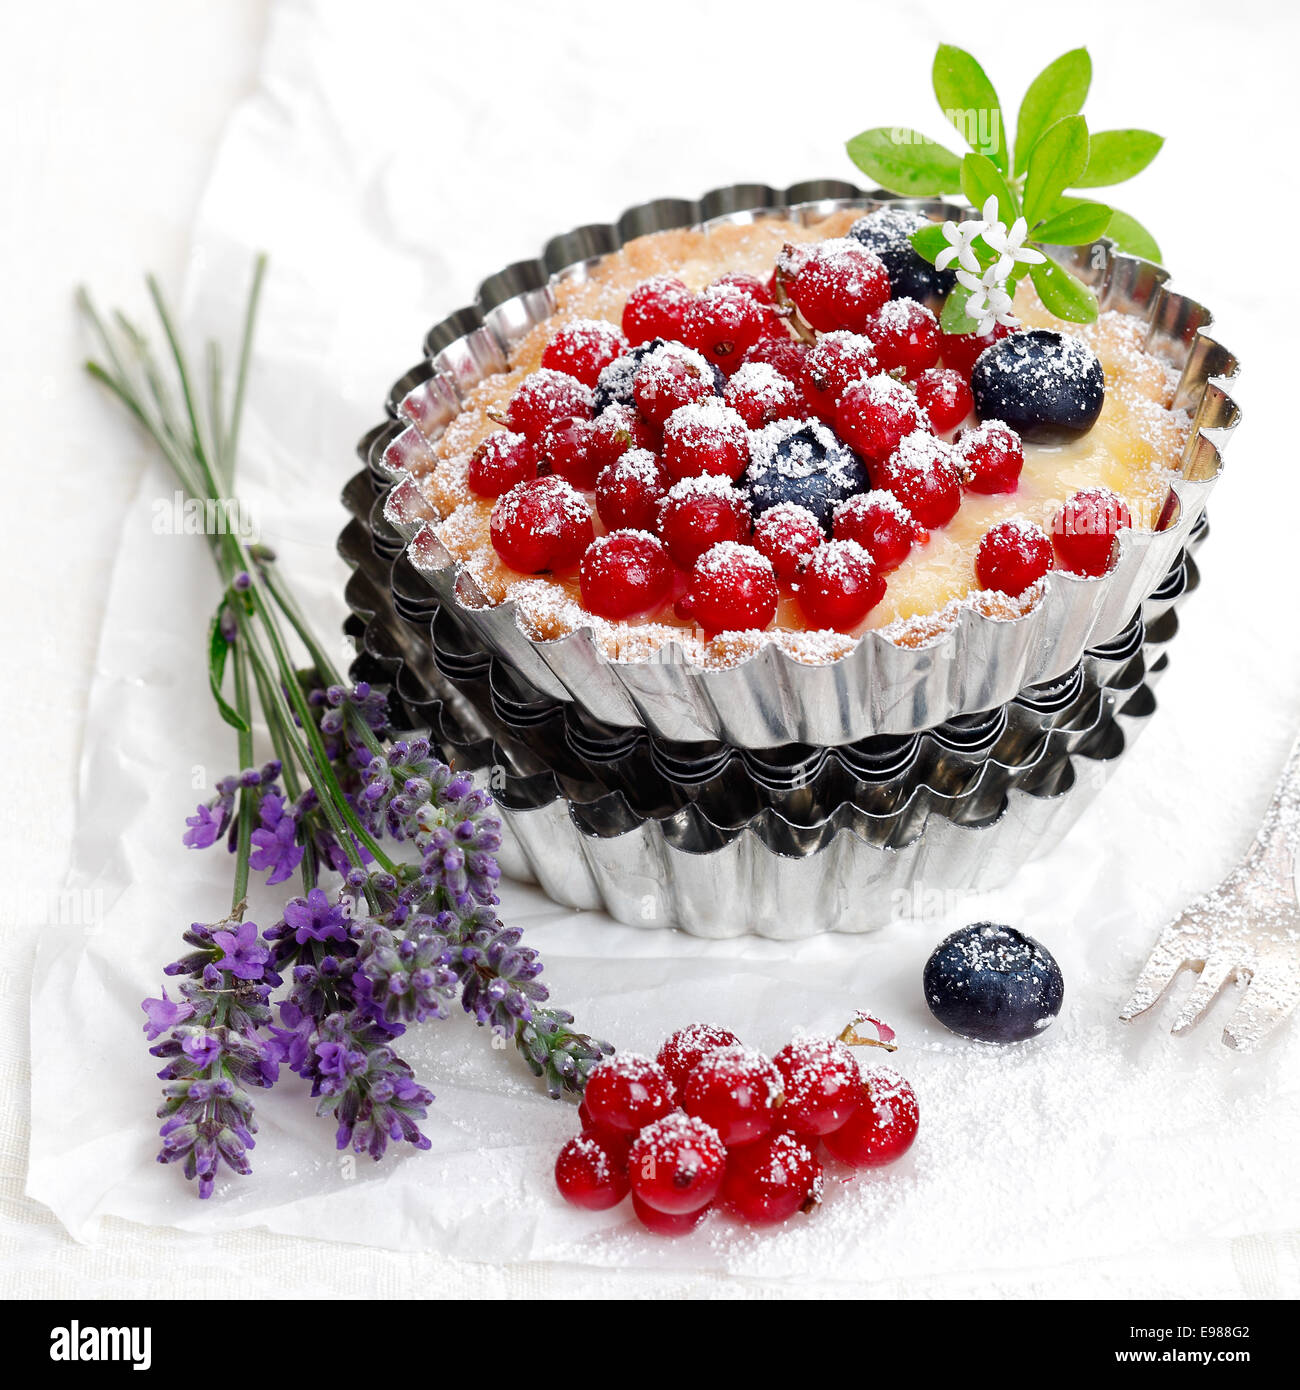 Scrumptious freshly baked red currant and blueberry tart in a decorative fluted metal pie pan with a bunch of fresh lavender Stock Photo